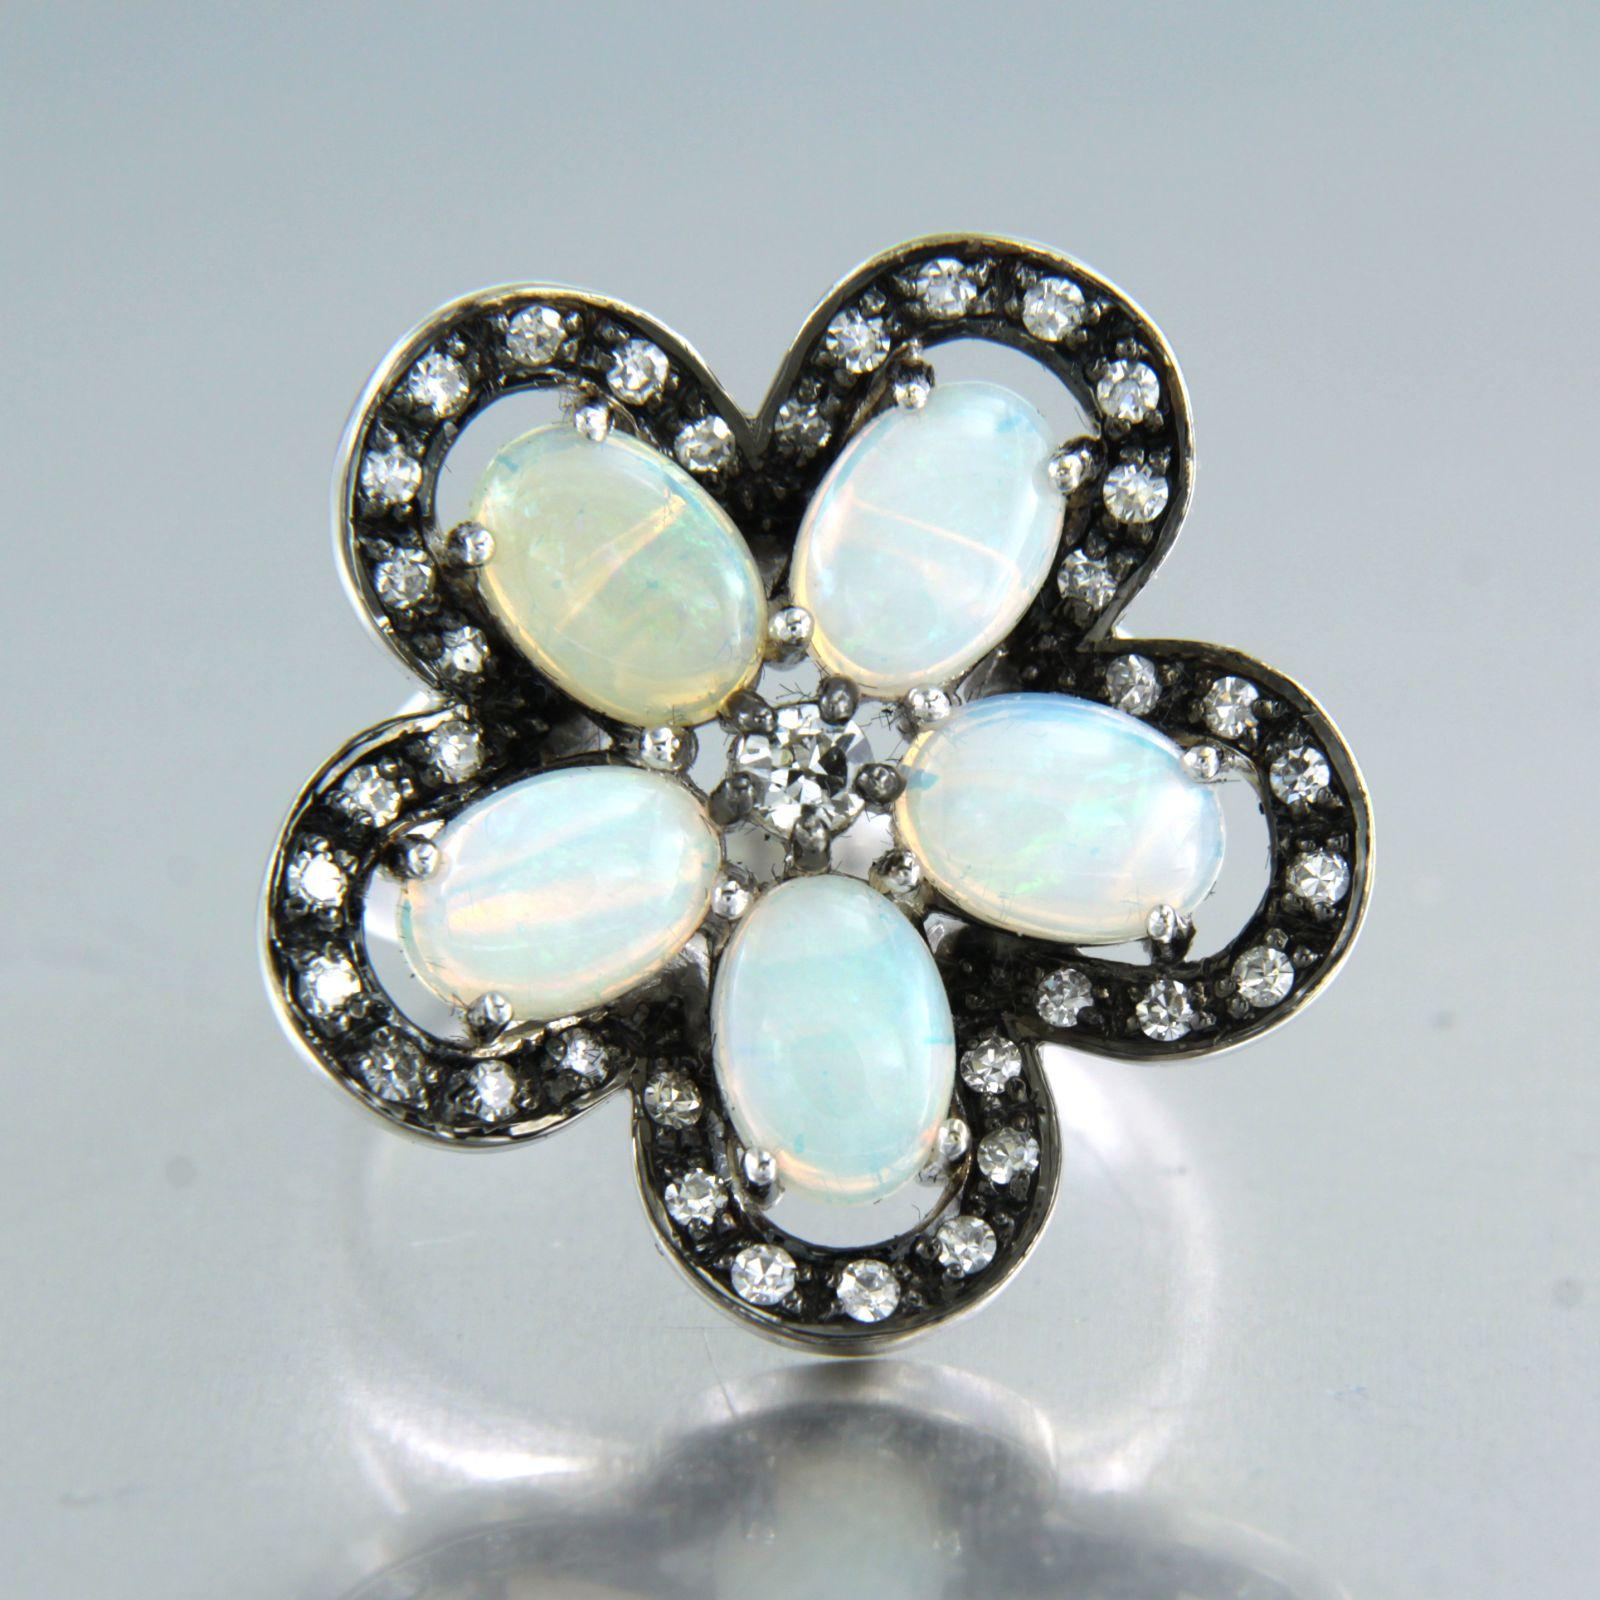 14k white gold ring in the shape of a flower set with opal and old mine cut and single cut diamonds - ring size U.S. 6.75 - EU. 17.25(54)

detailed description:

the top of the ring is rhodium plated and has a diameter of 2.3 cm wide

Ring size U.S.